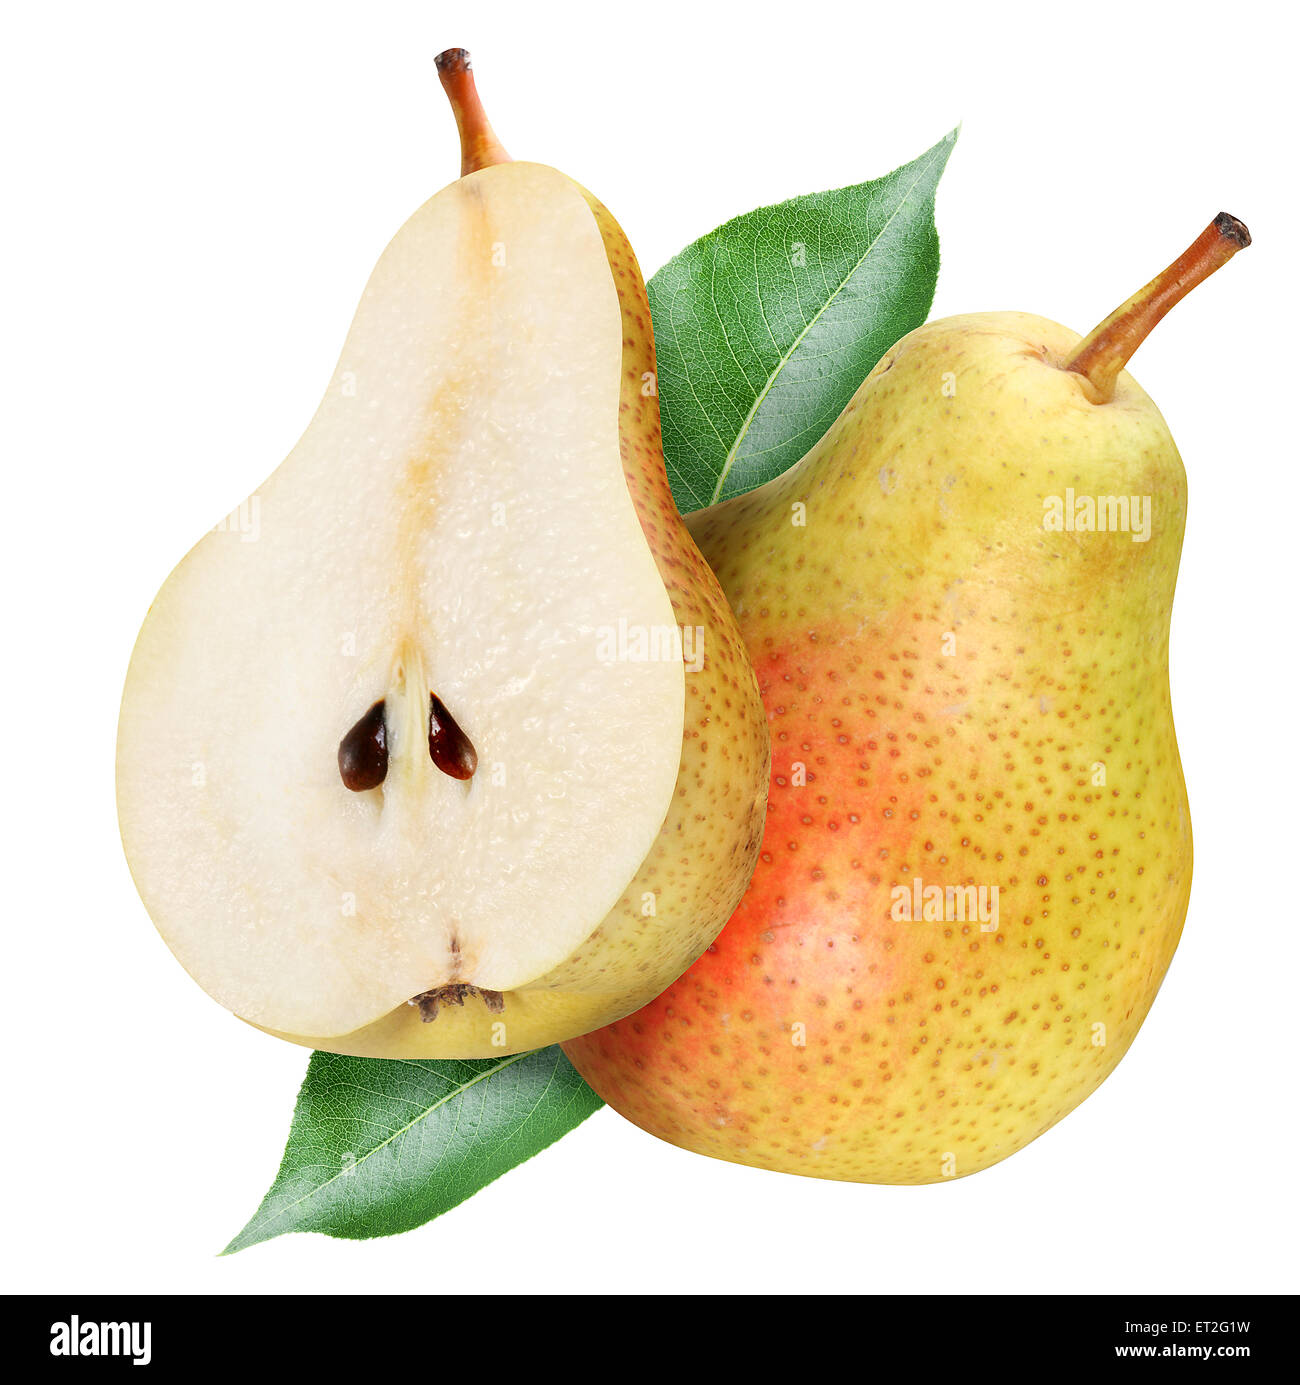 Ripe pears with leaves. File contains clipping paths. Stock Photo